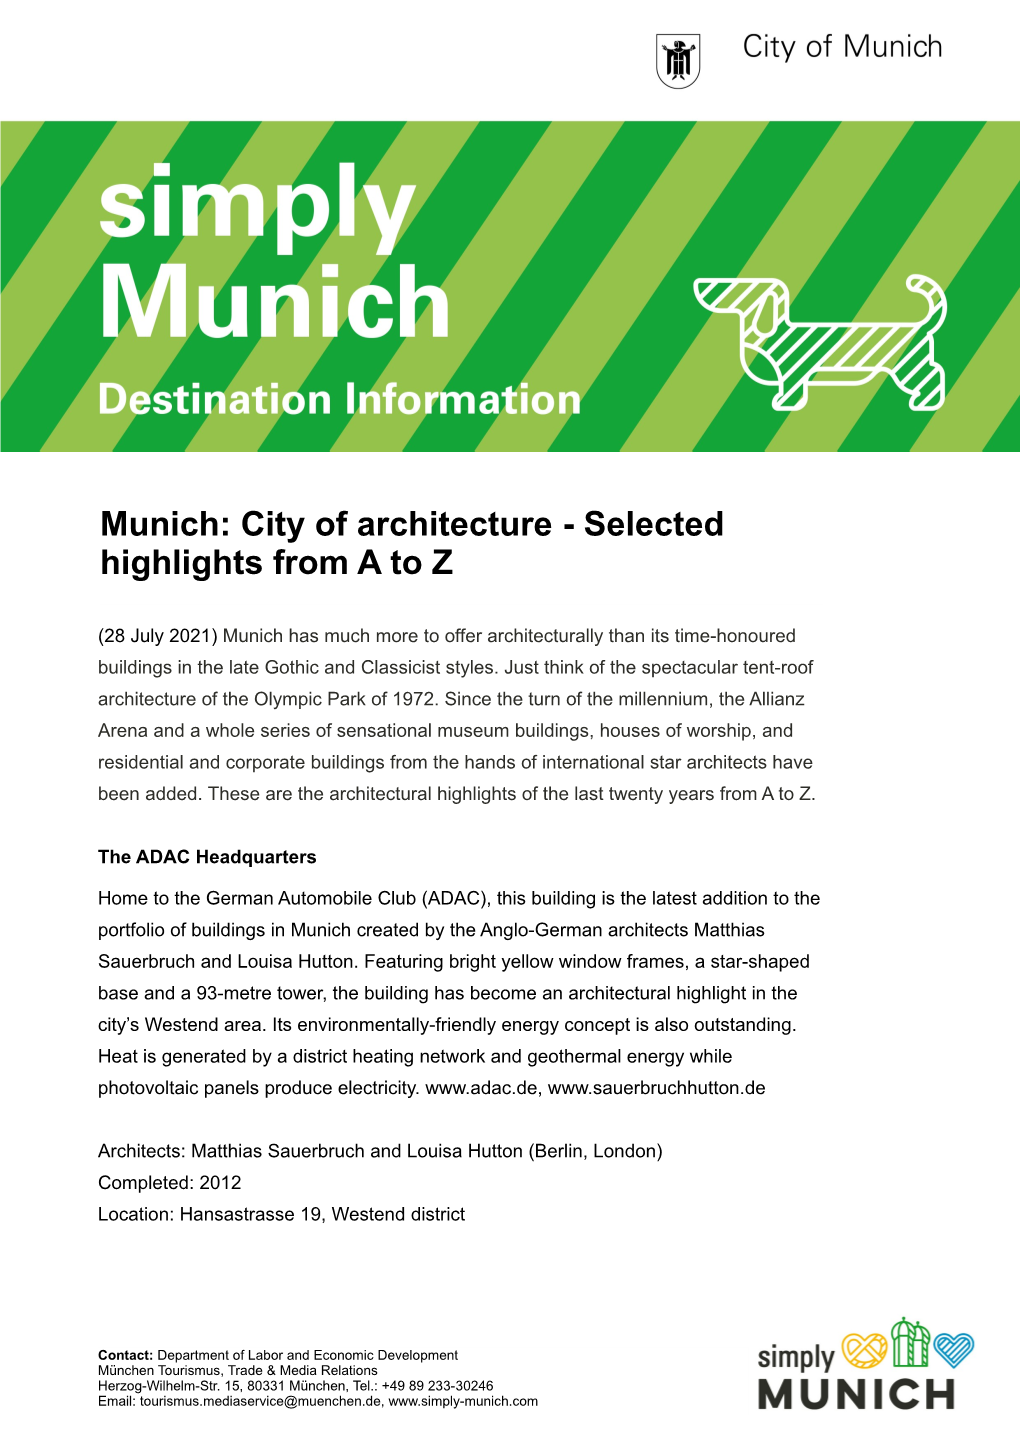 Munich: City of Architecture - Selected Highlights from a to Z